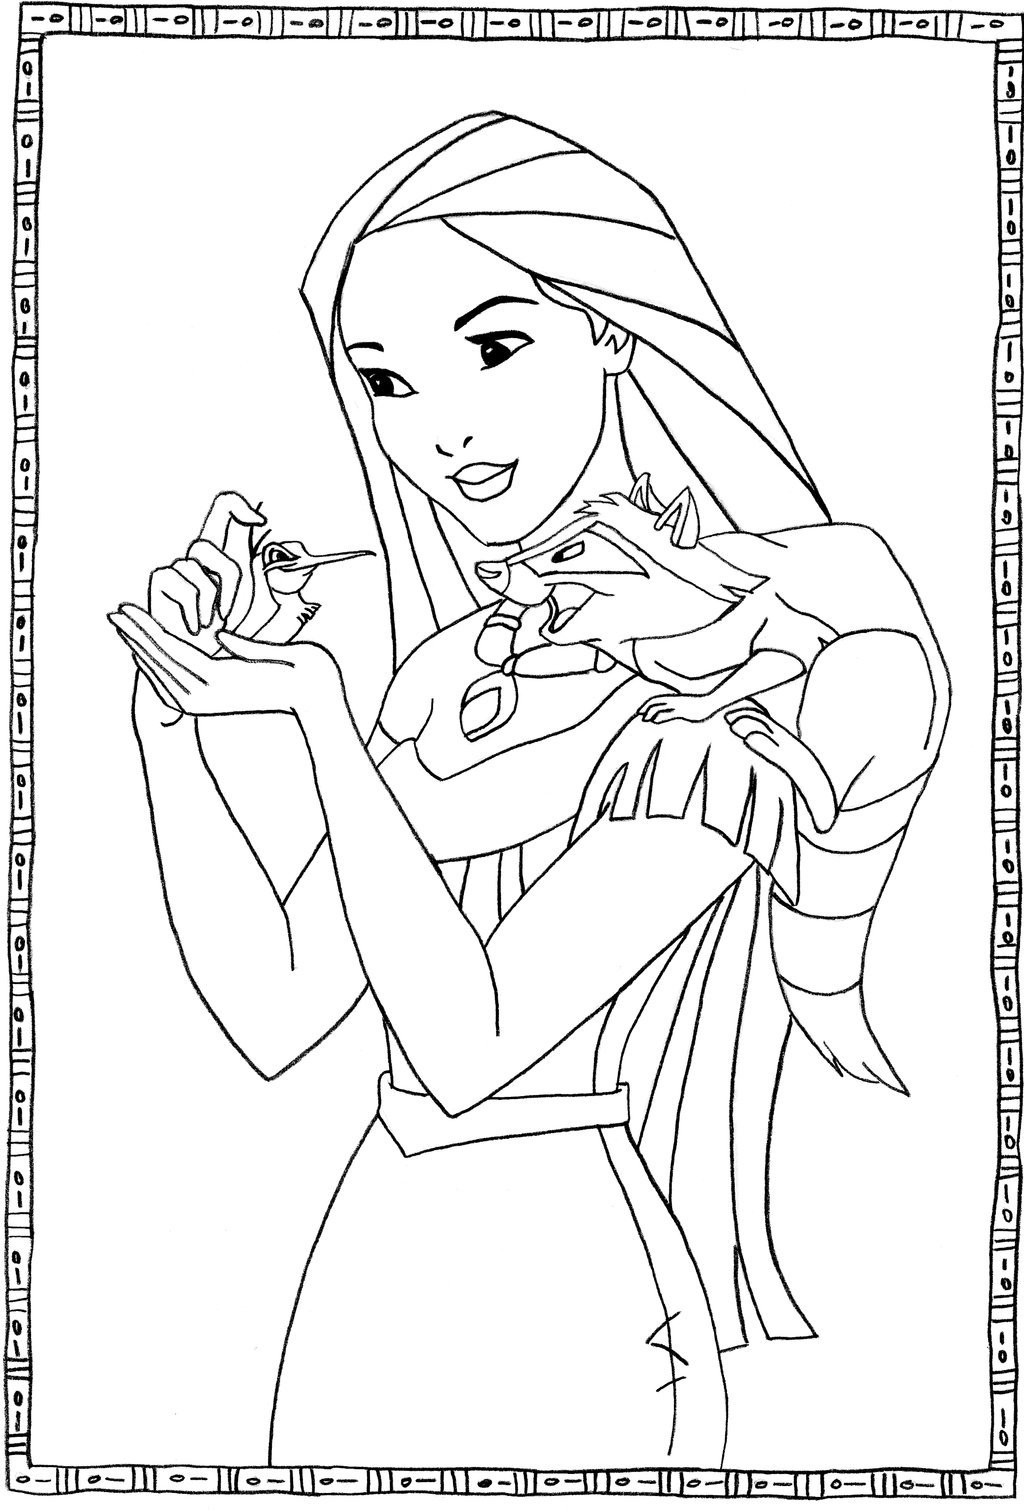 Pocahontas Coloring Pages
 Pocahontas by ChristieBase on DeviantArt